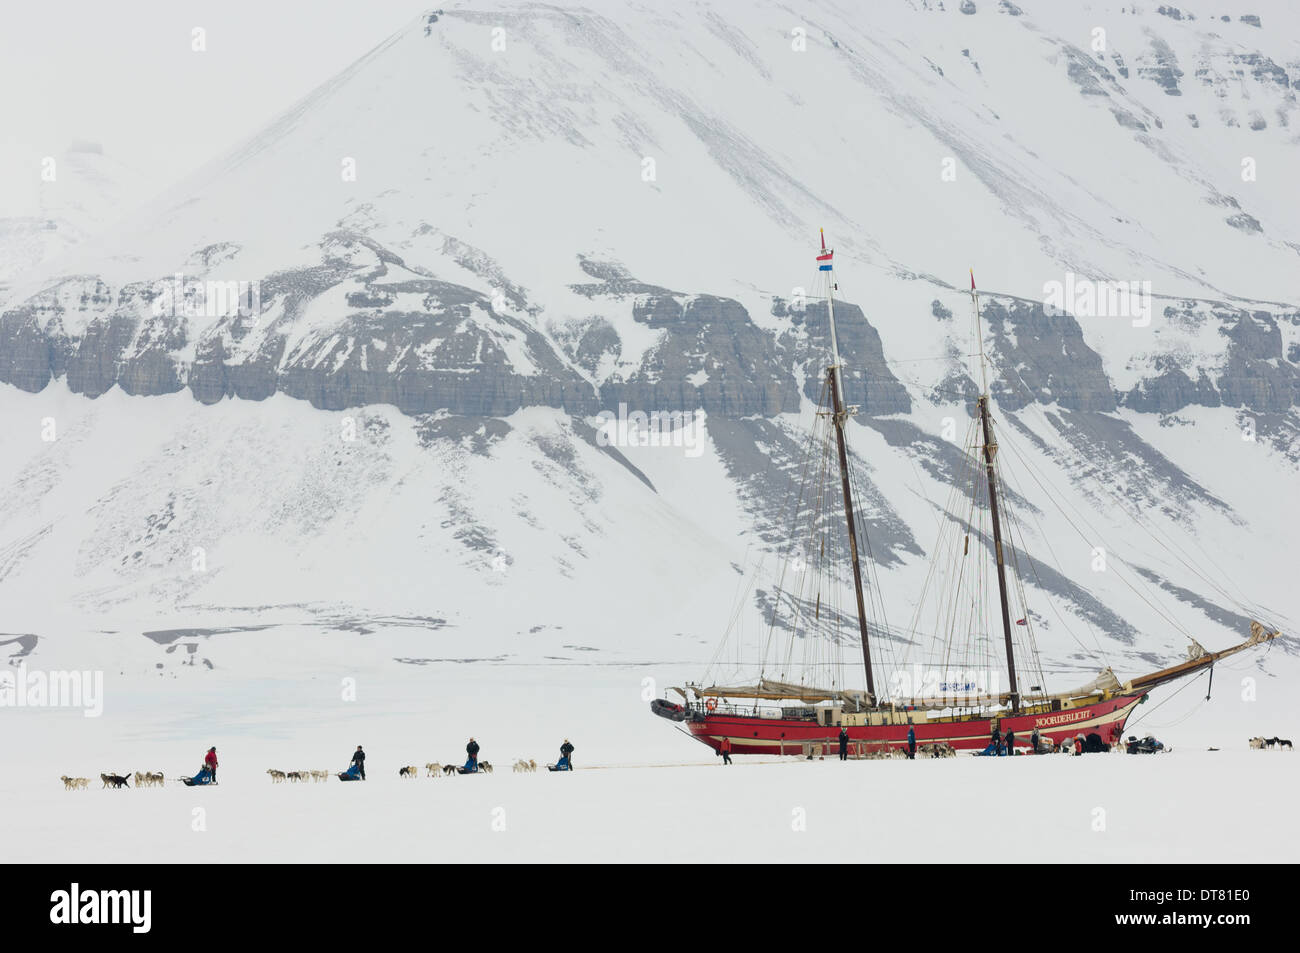 Dog sled teams racing away from the Noorderlicht 'Ship in the Ice', Temple Fjord (Tempelfjorden), Spitsbergen, Svalbard Archipelago, Norway Stock Photo